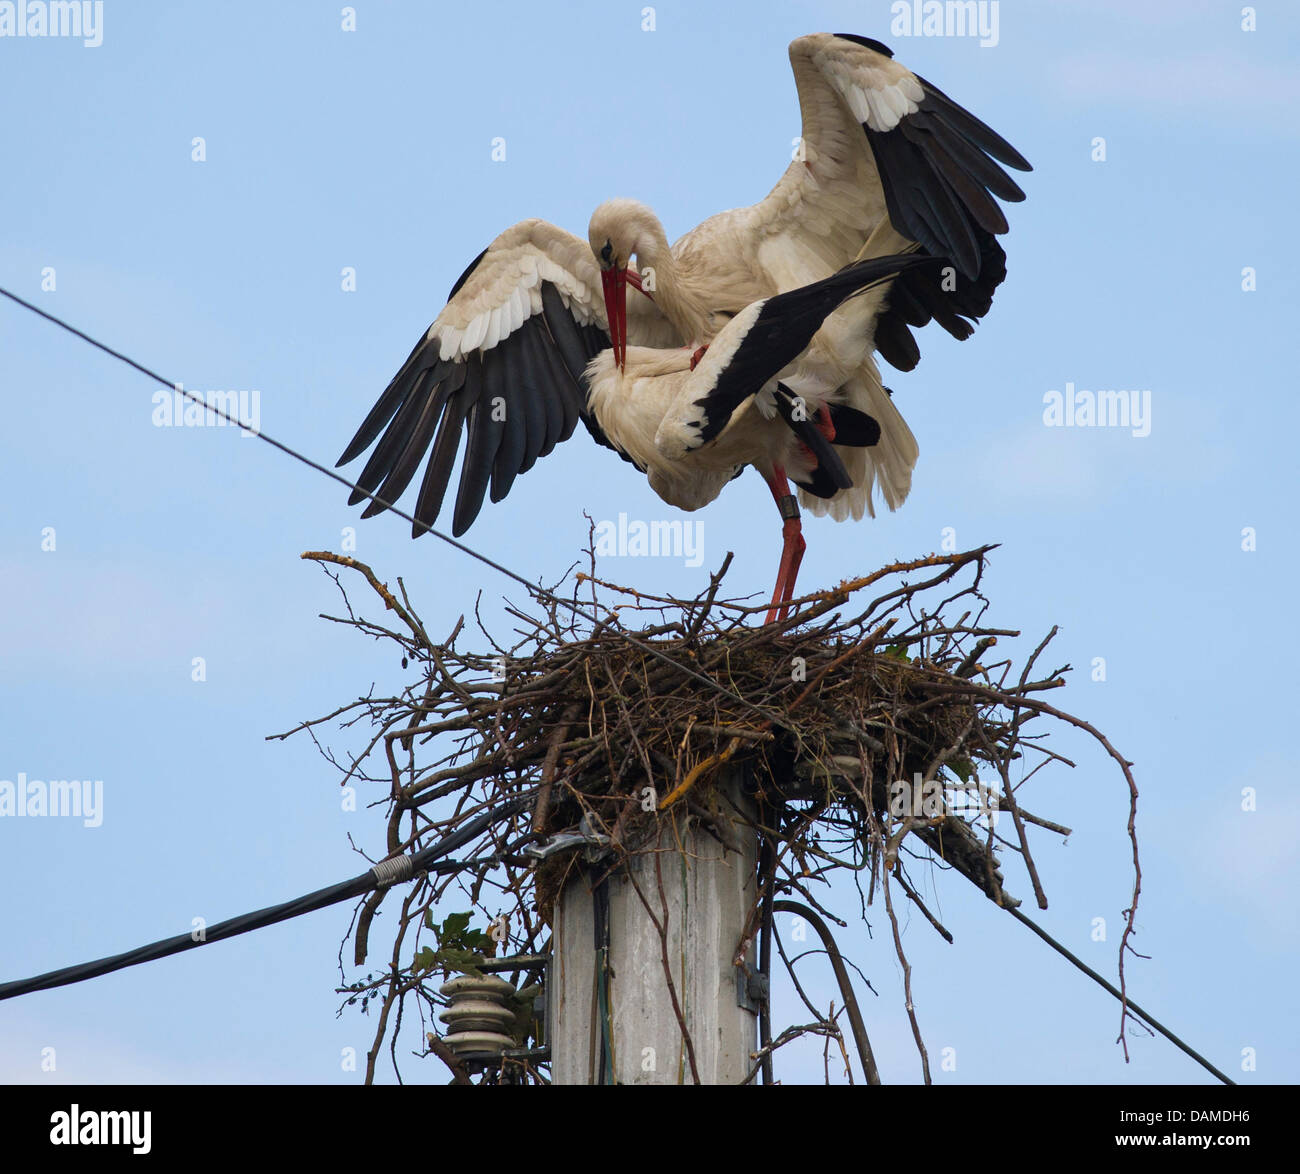 Two storks mate inside a nest on an power pole in Raddusch im Spreewald befindet, Germany, 7 June 2011. Nesting on a pole is fairly dangerous for the birds because they can easily be electrocuted. Photo: Patrick Pleul Stock Photo